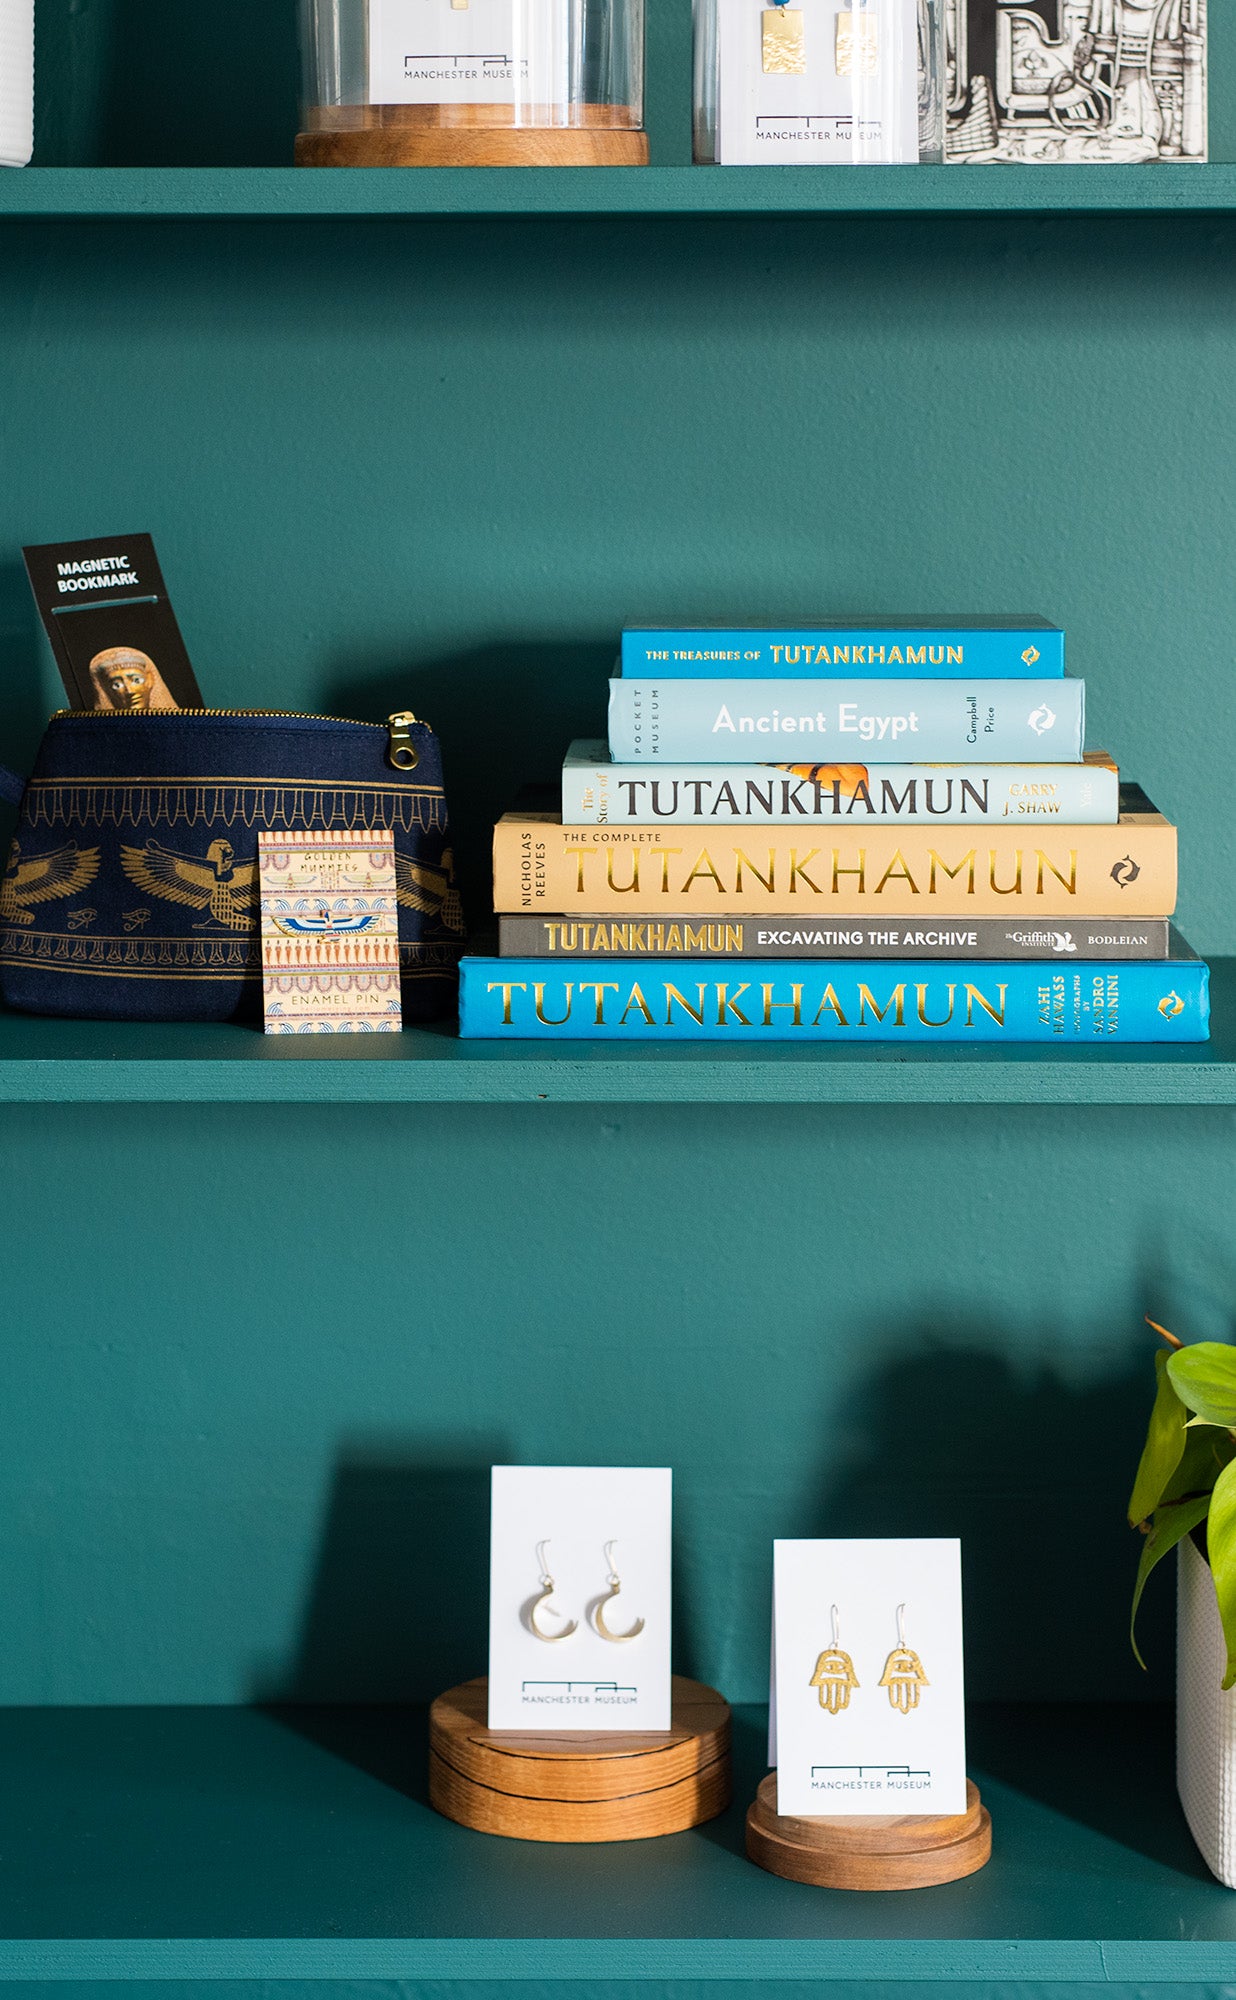 Golden Mummies collection books and products sat on teal shelves